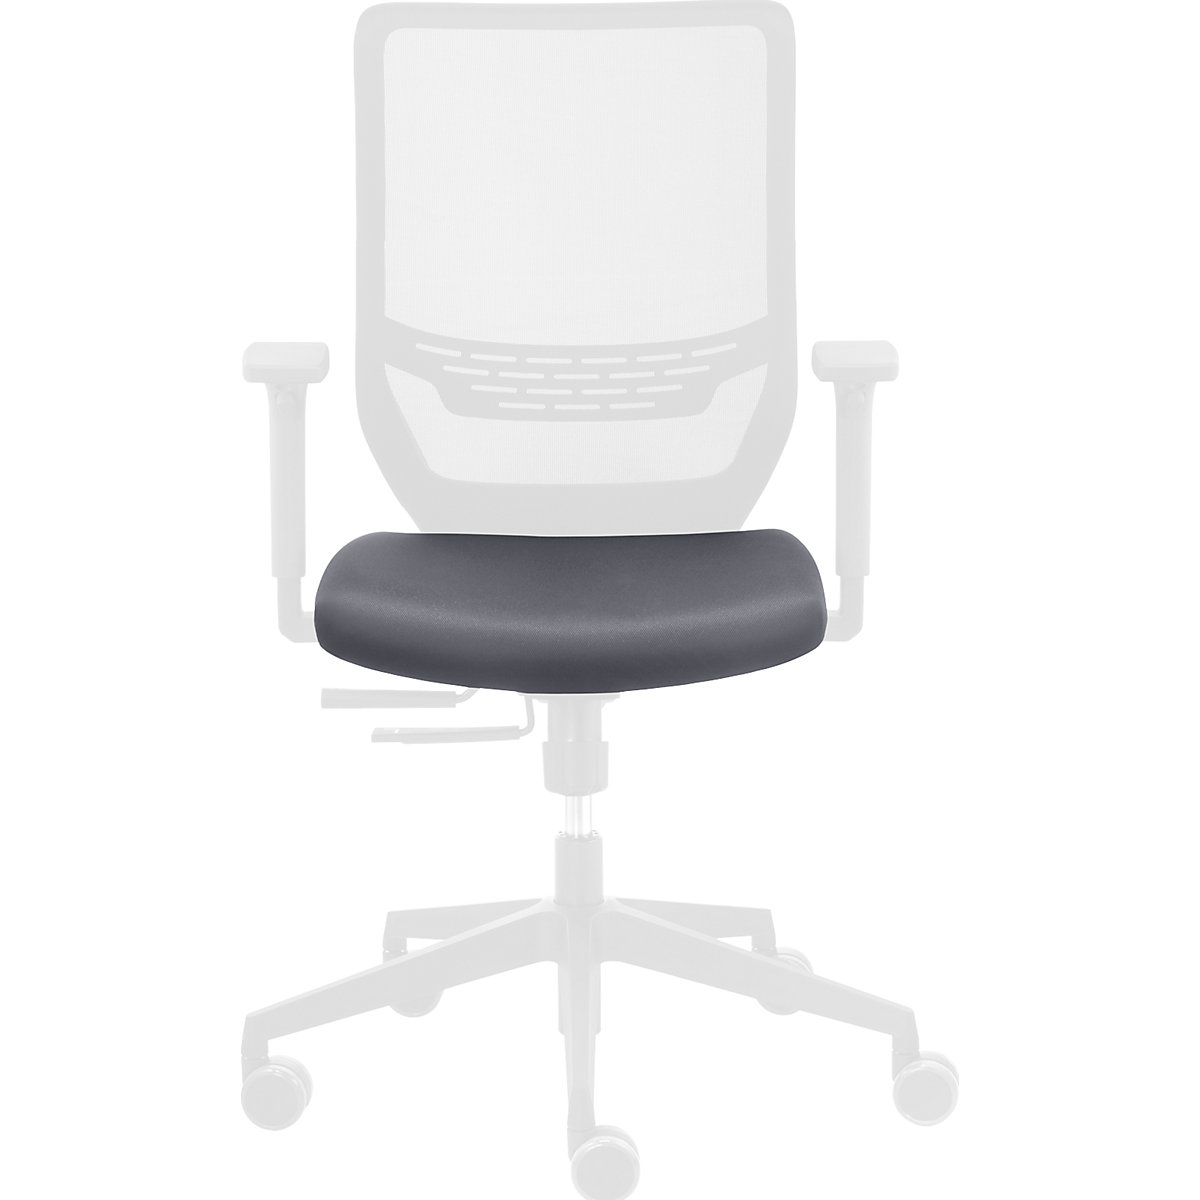 TO-SYNC seat cover - TrendOffice